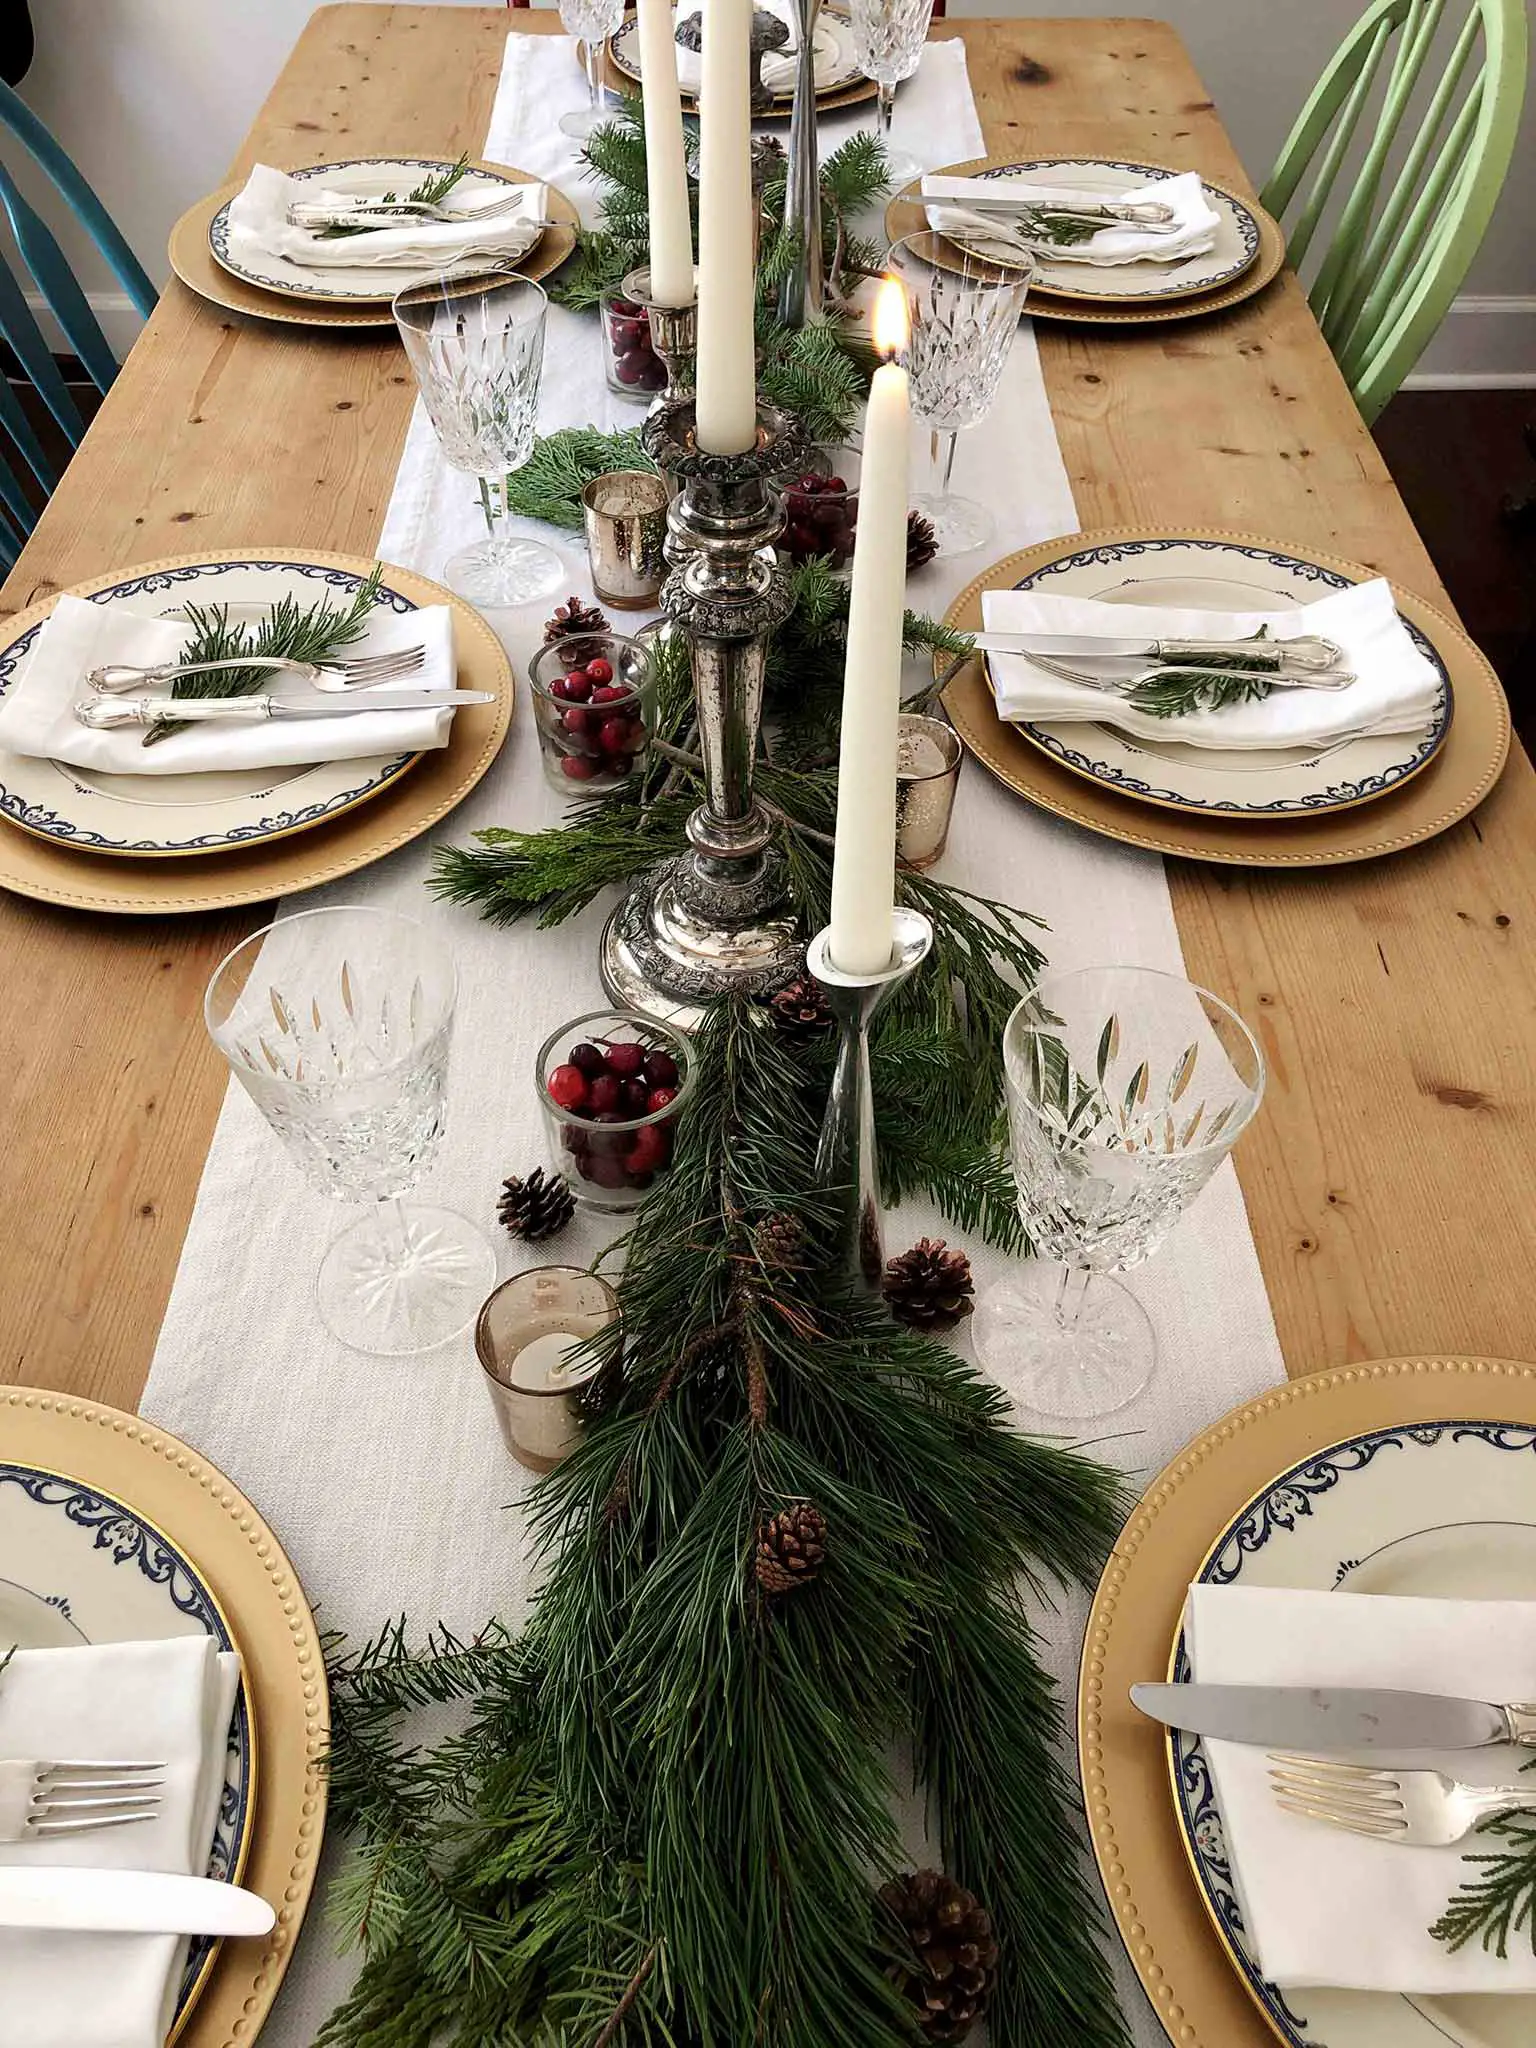 Tablescape details | How to Create a Beautiful Tablescape on a Budget | That Homebird Life Blog #christmasdecor #tablescape